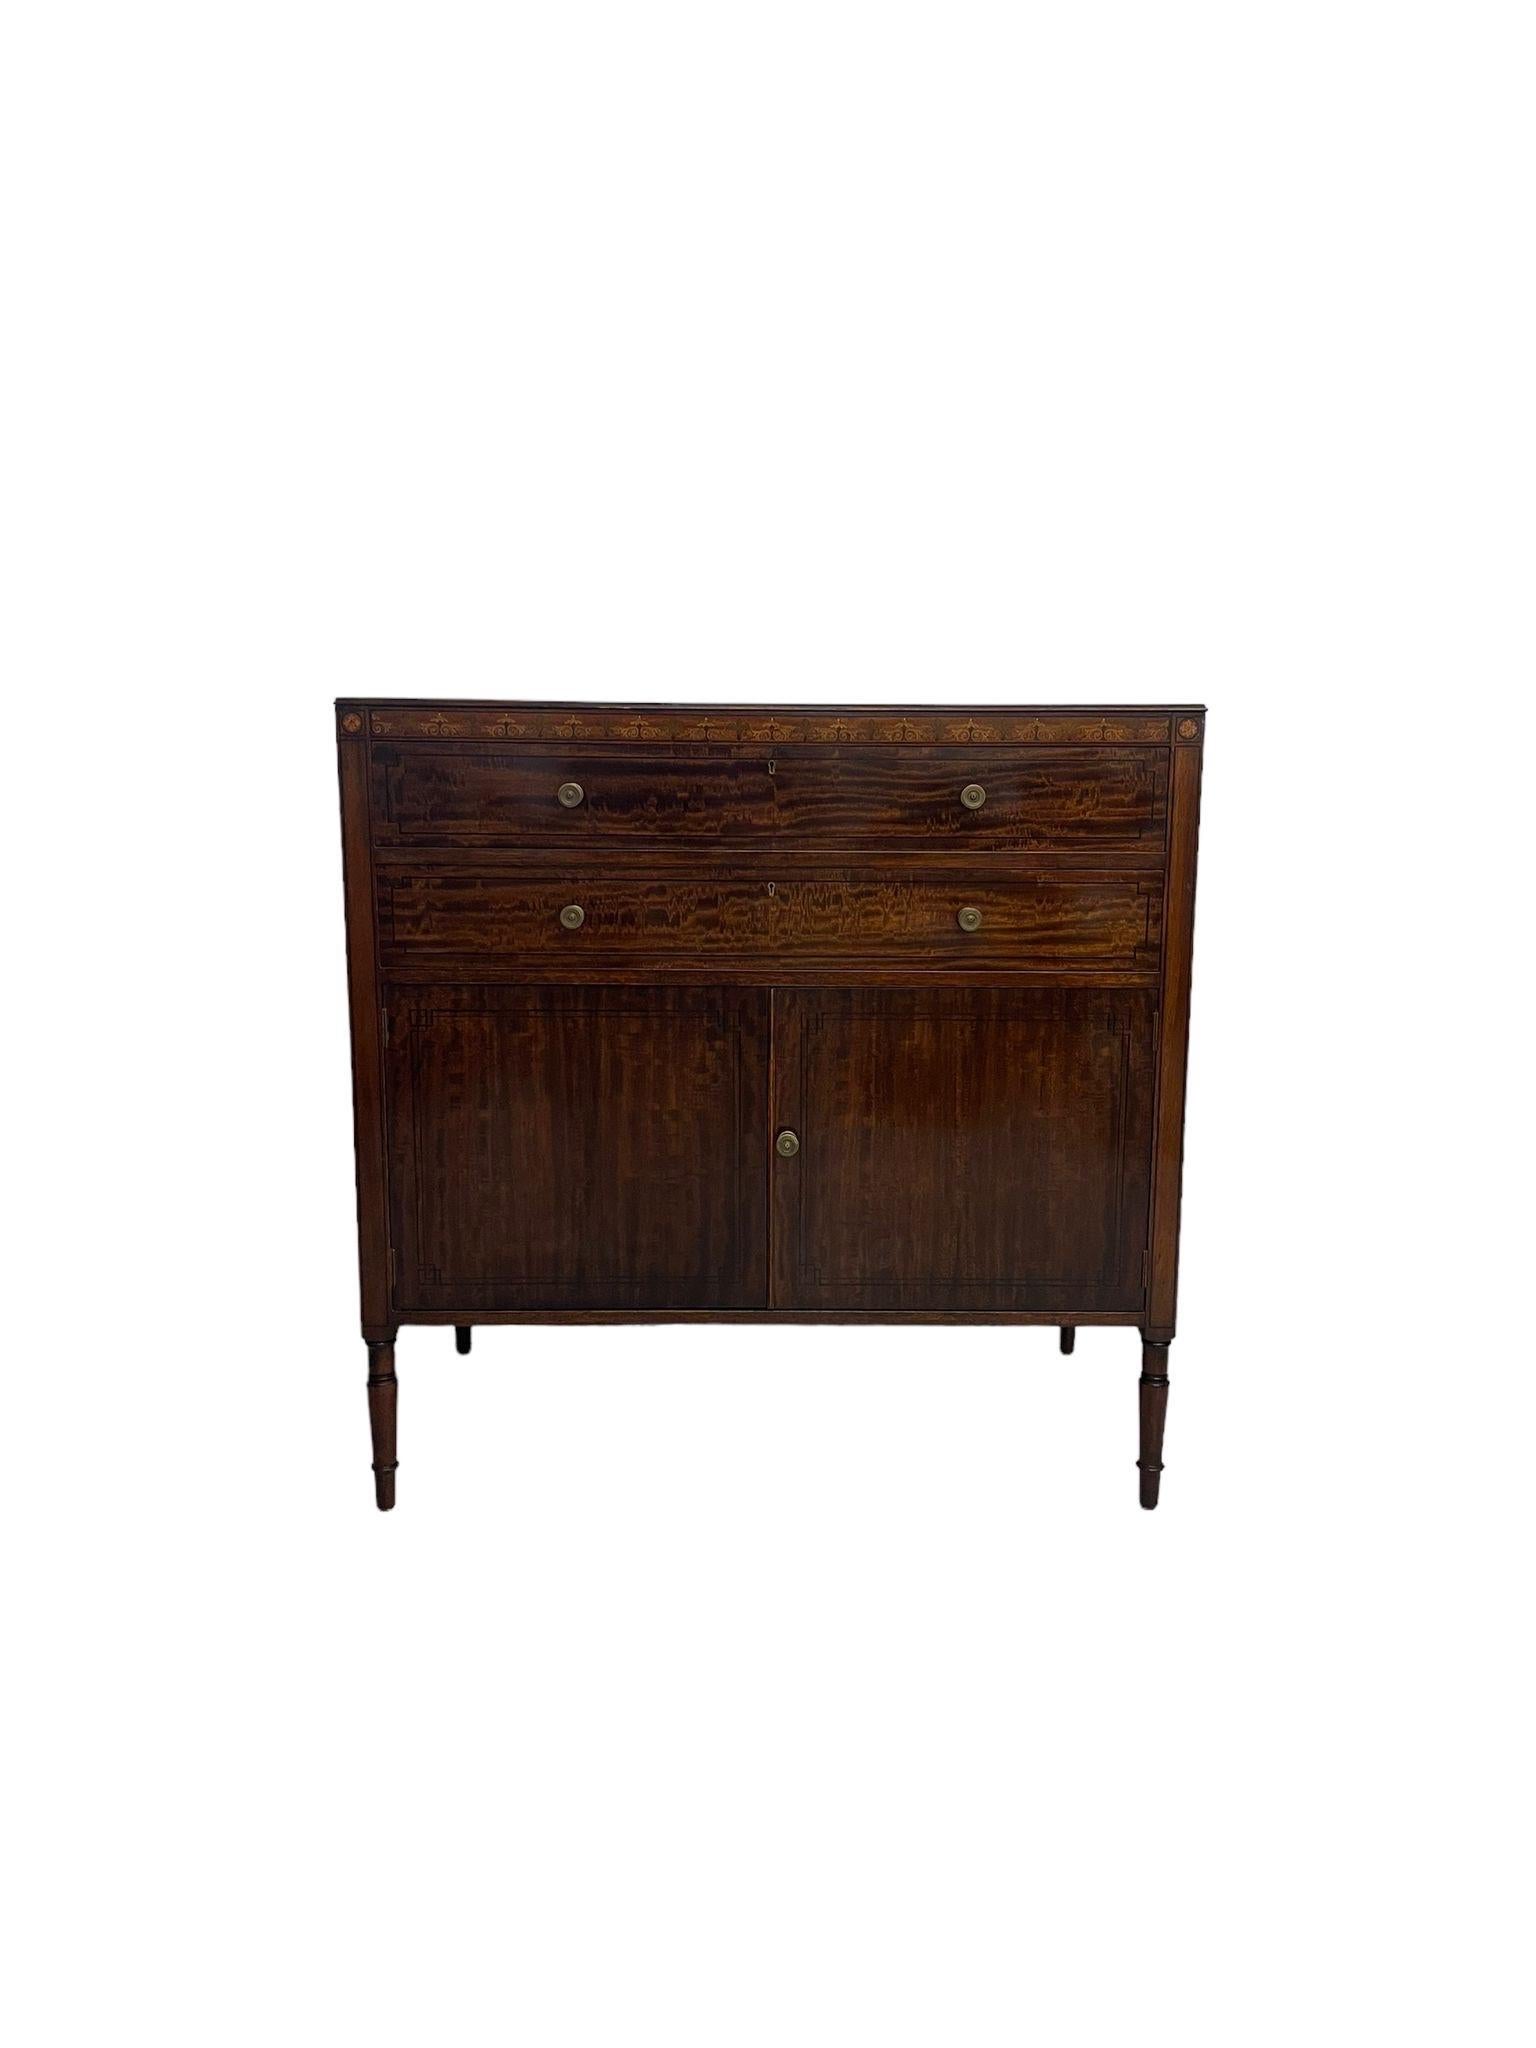 This Antique Buffet had Original Hardware and Dovetail Drawers. Turned Wood Legs , the Wood on this Piece is Possibly Mahogany. Finished Back and Interiors to the Drawers as Pictured. Nice Grain to the Wood inlay Feature Appears to be Handmade.